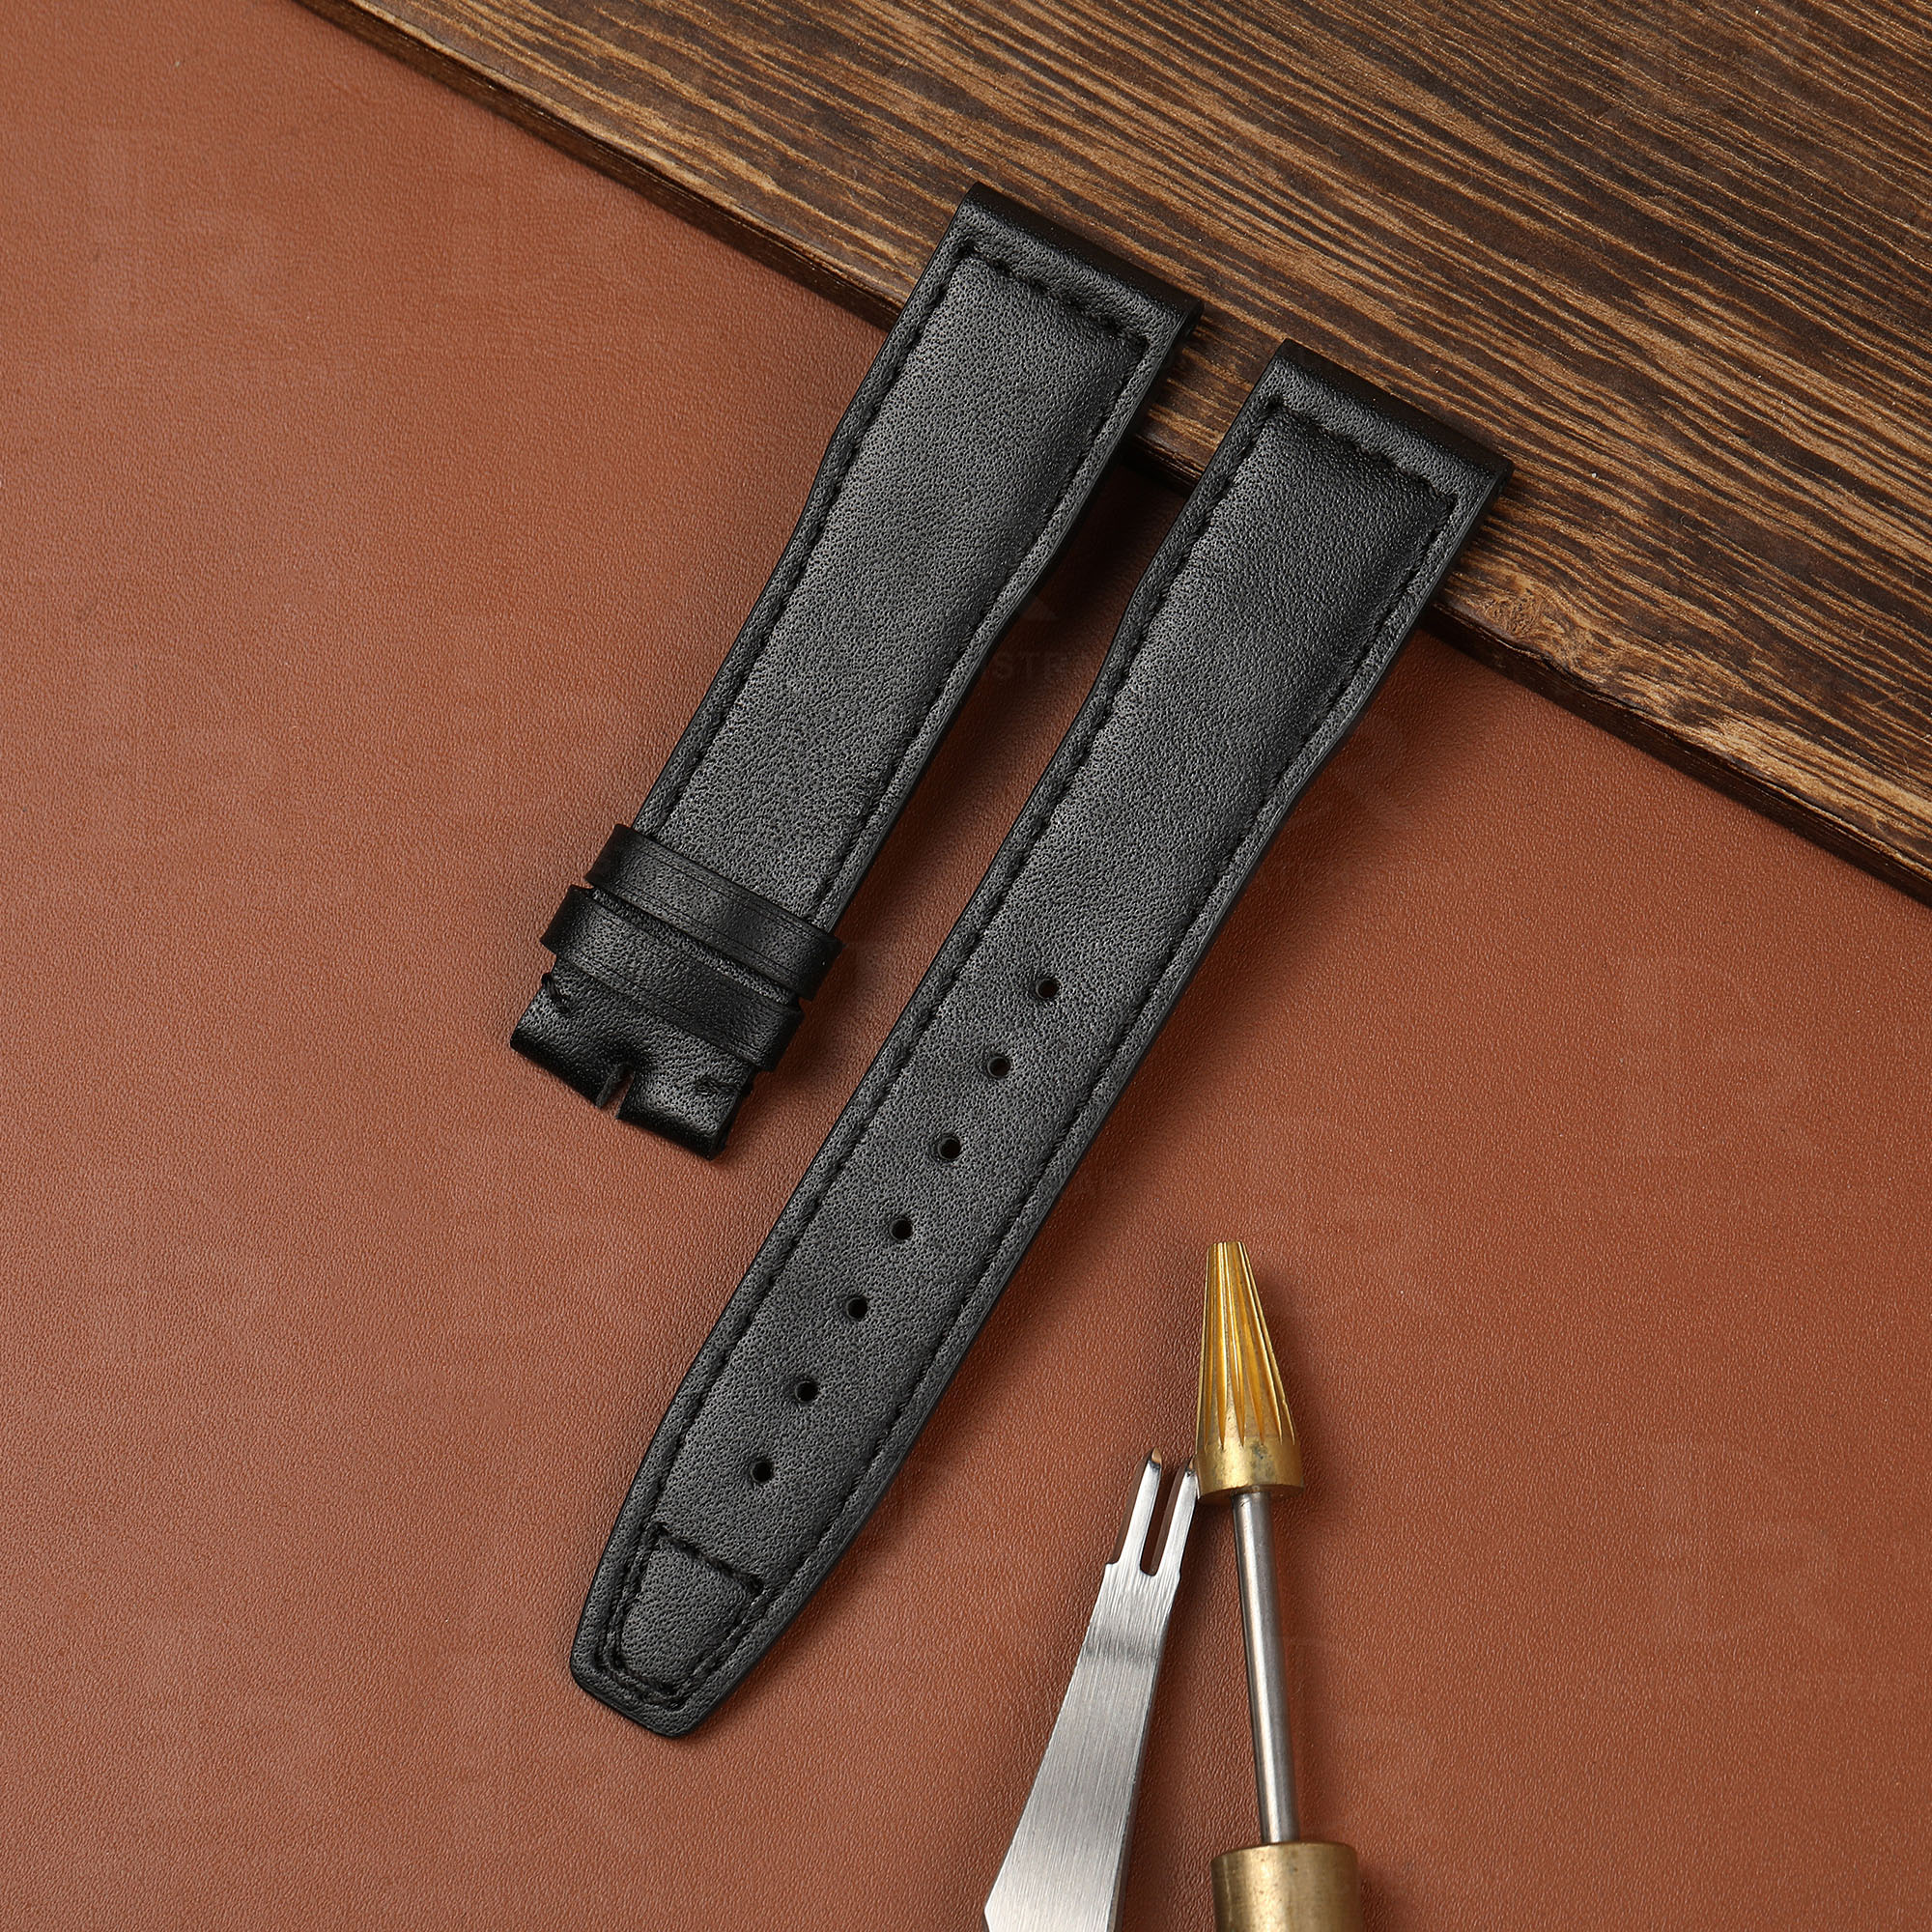 Custom Black replacement leather watch strap replacement for IWC Pilot Mark XVIII Chronograph